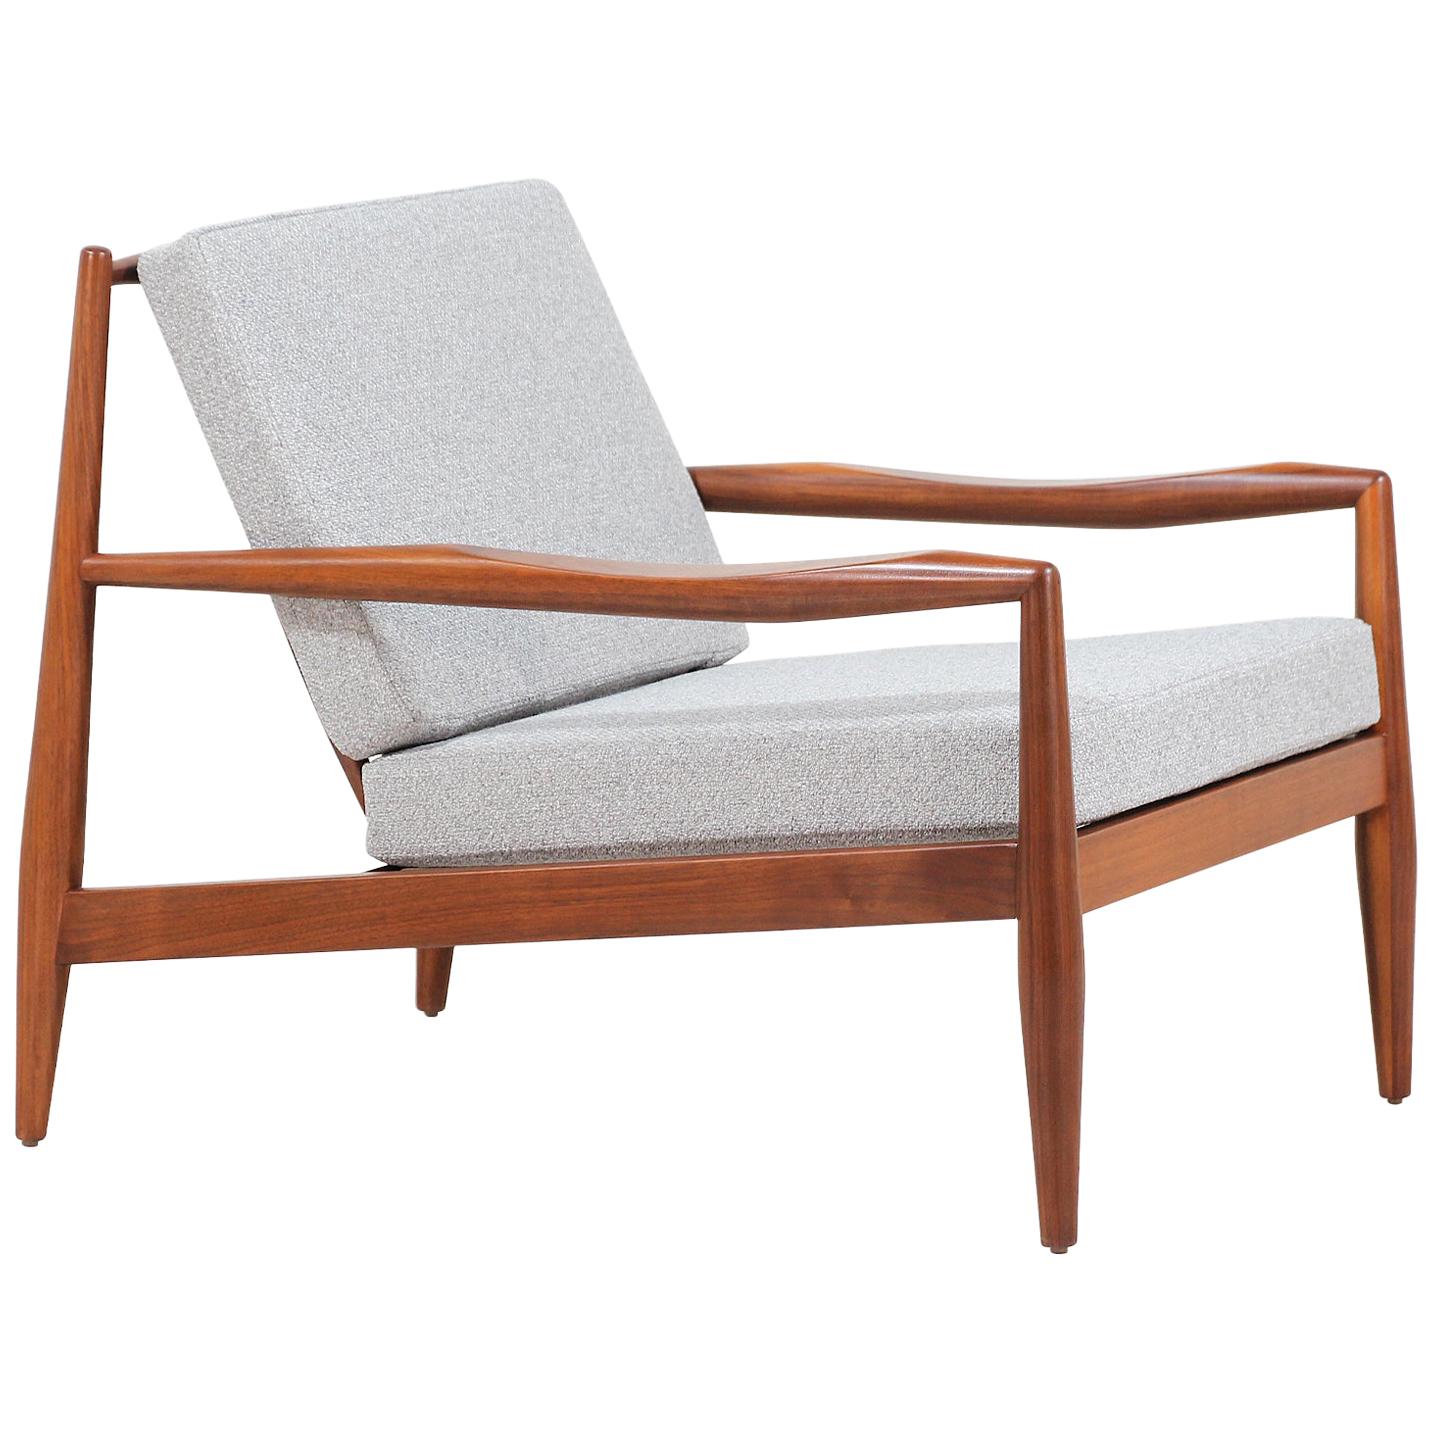 Adrian Pearsall Model 843-C Walnut Lounge Chair for Craft Associates